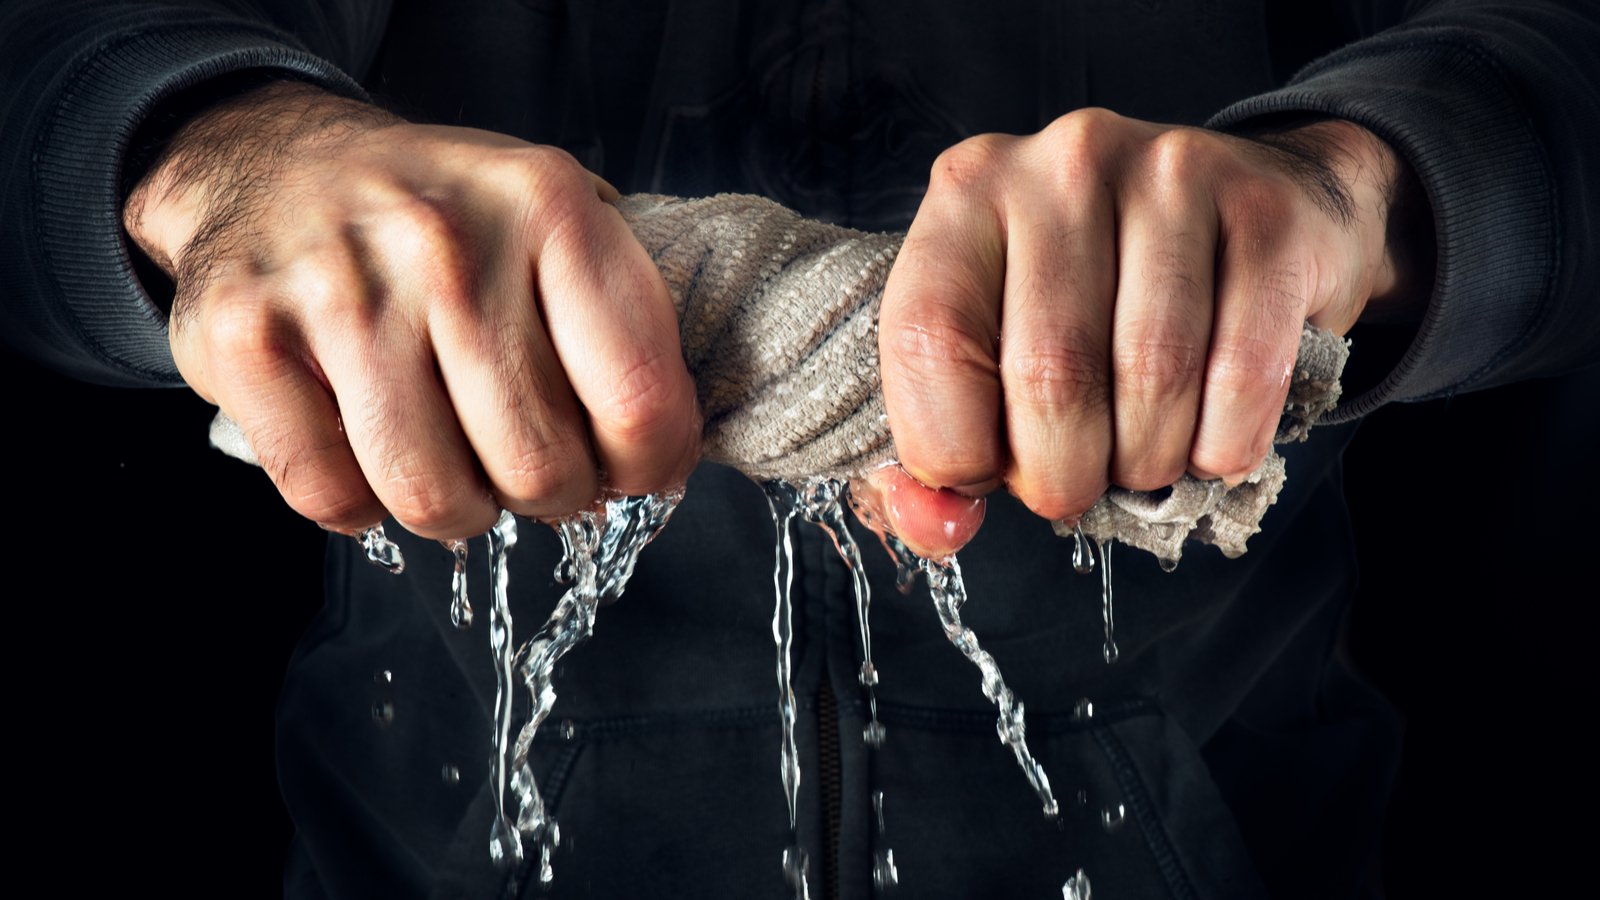 Man squeezing water out of a rag representing Short Squeeze Stocks.